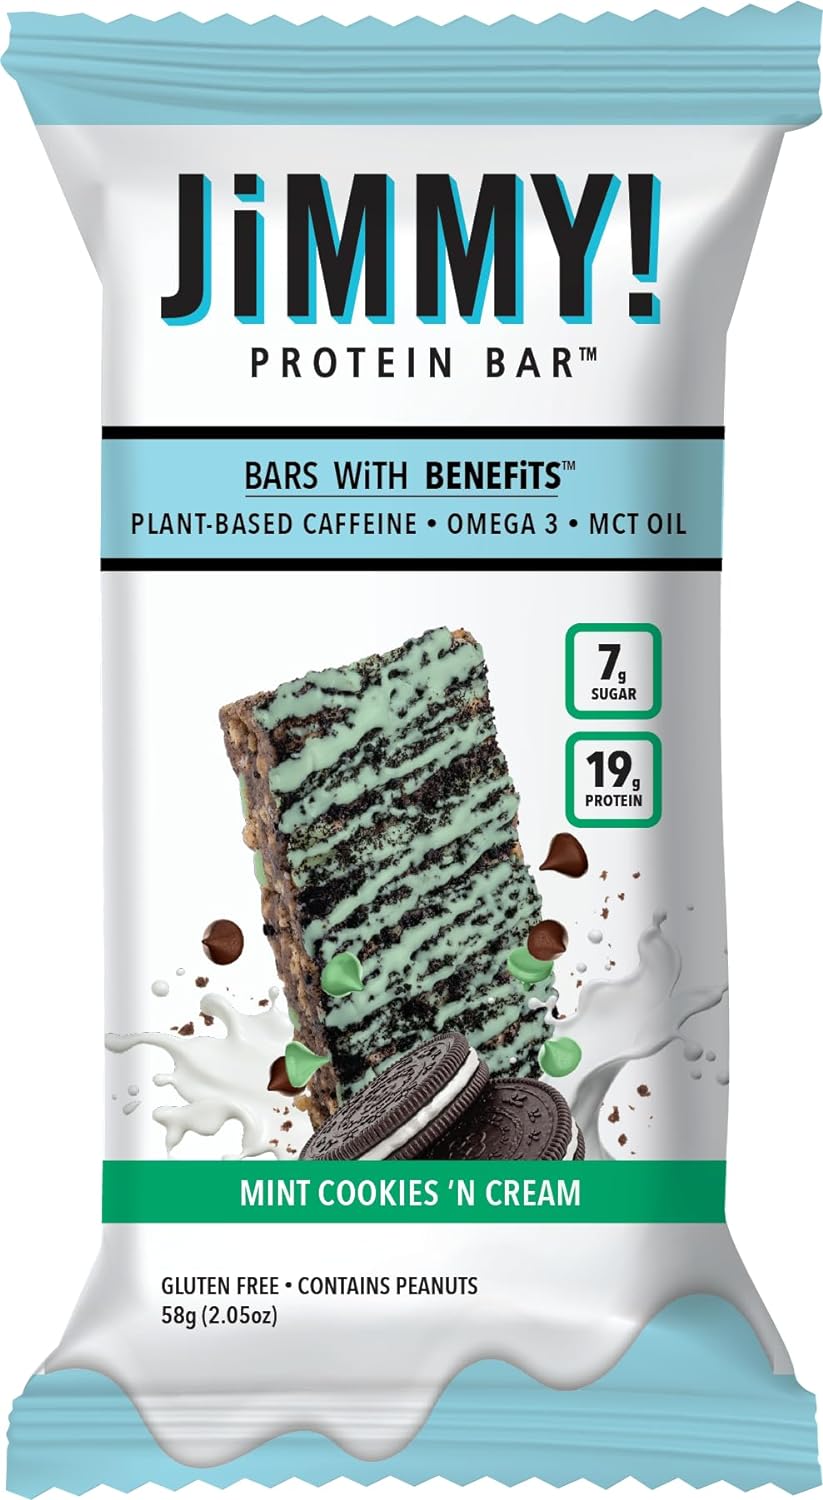 JiMMY! Protein Bar, Mint Cookies and Cream, Wake and Focus, 12 Count -0.67 Ounces